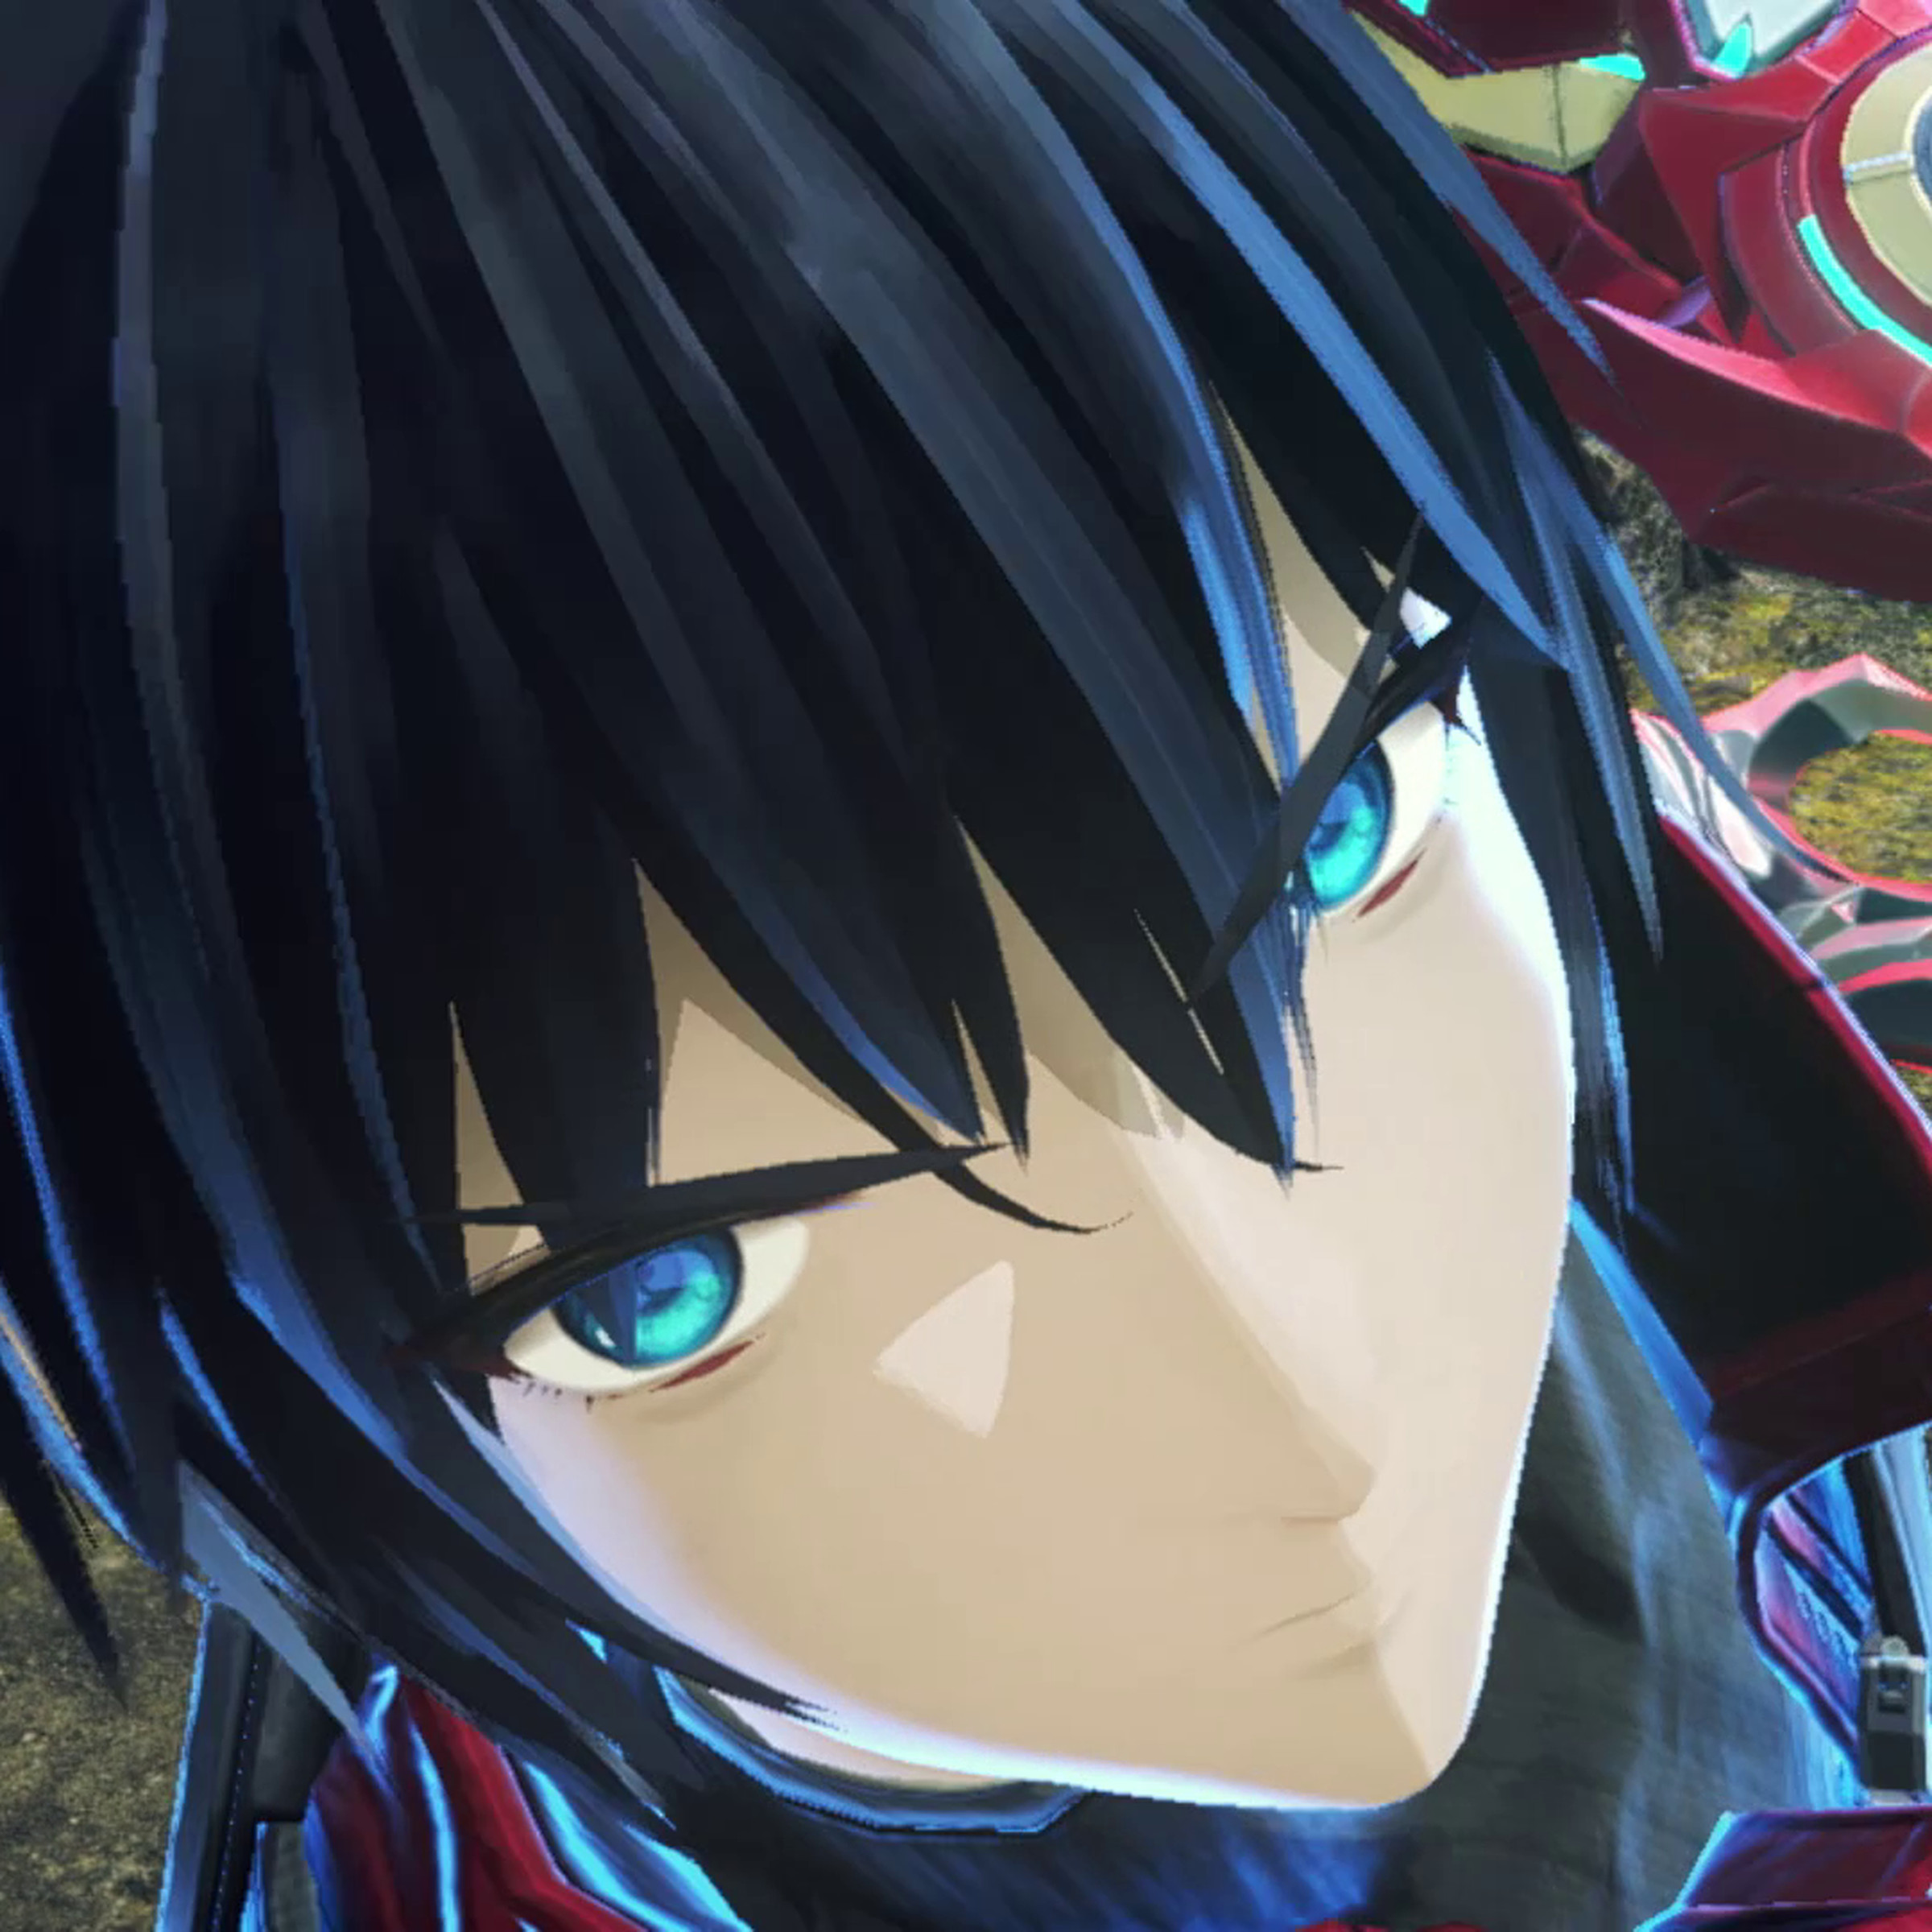 Screenshot from Nintendo’s Xenoblade Chronicles 3 featuring a close up of protagonist Noah’s face as he swings the titular Xenoblade.